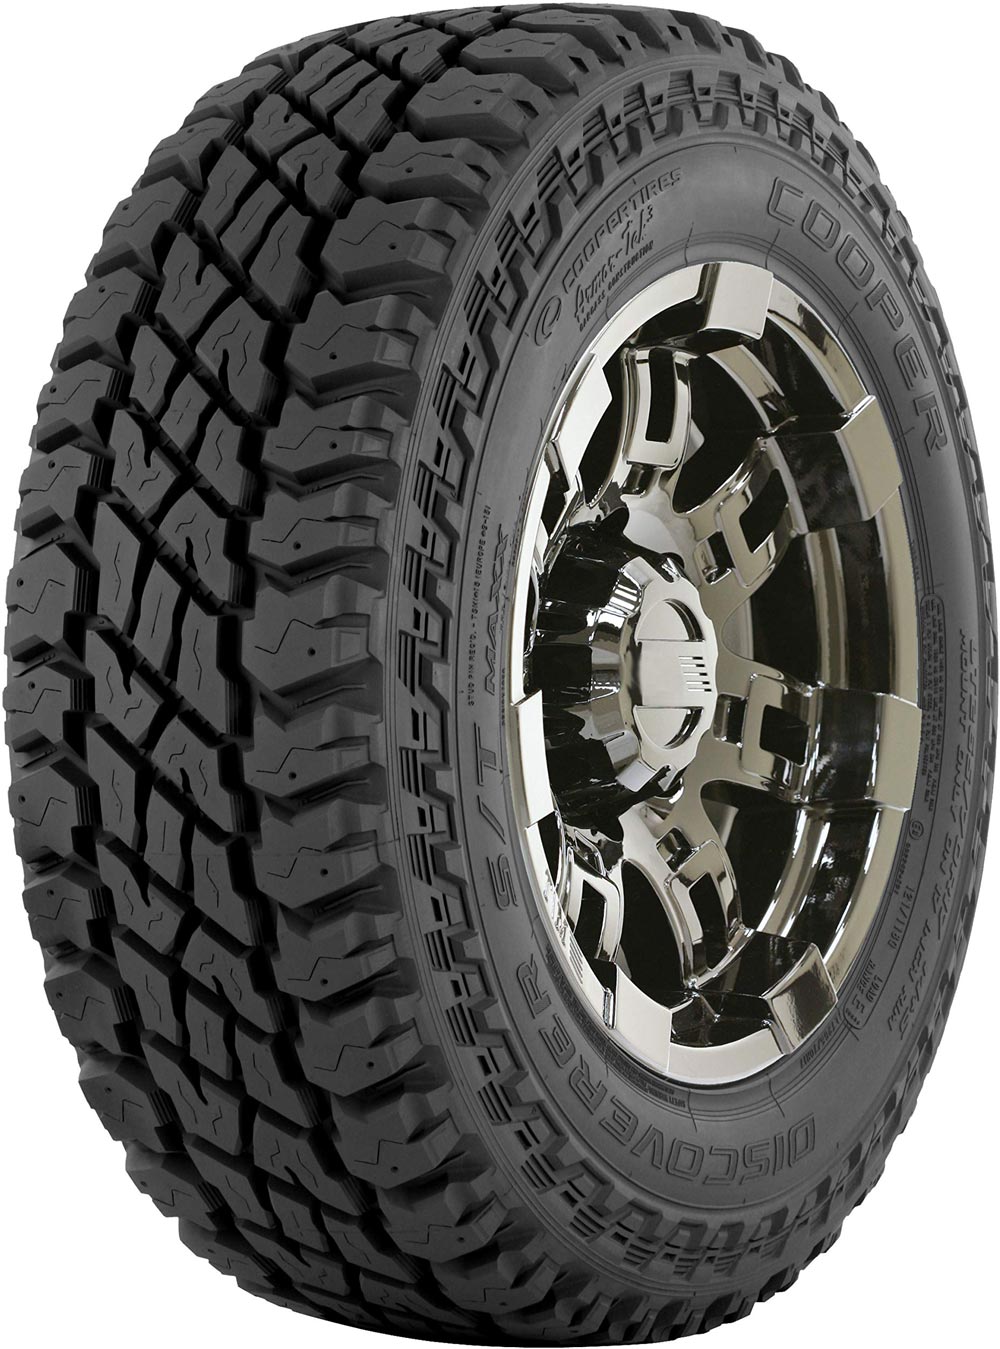 COOPER DISCOVERER ST MAXX P O BSW 305/55 R20 121Q